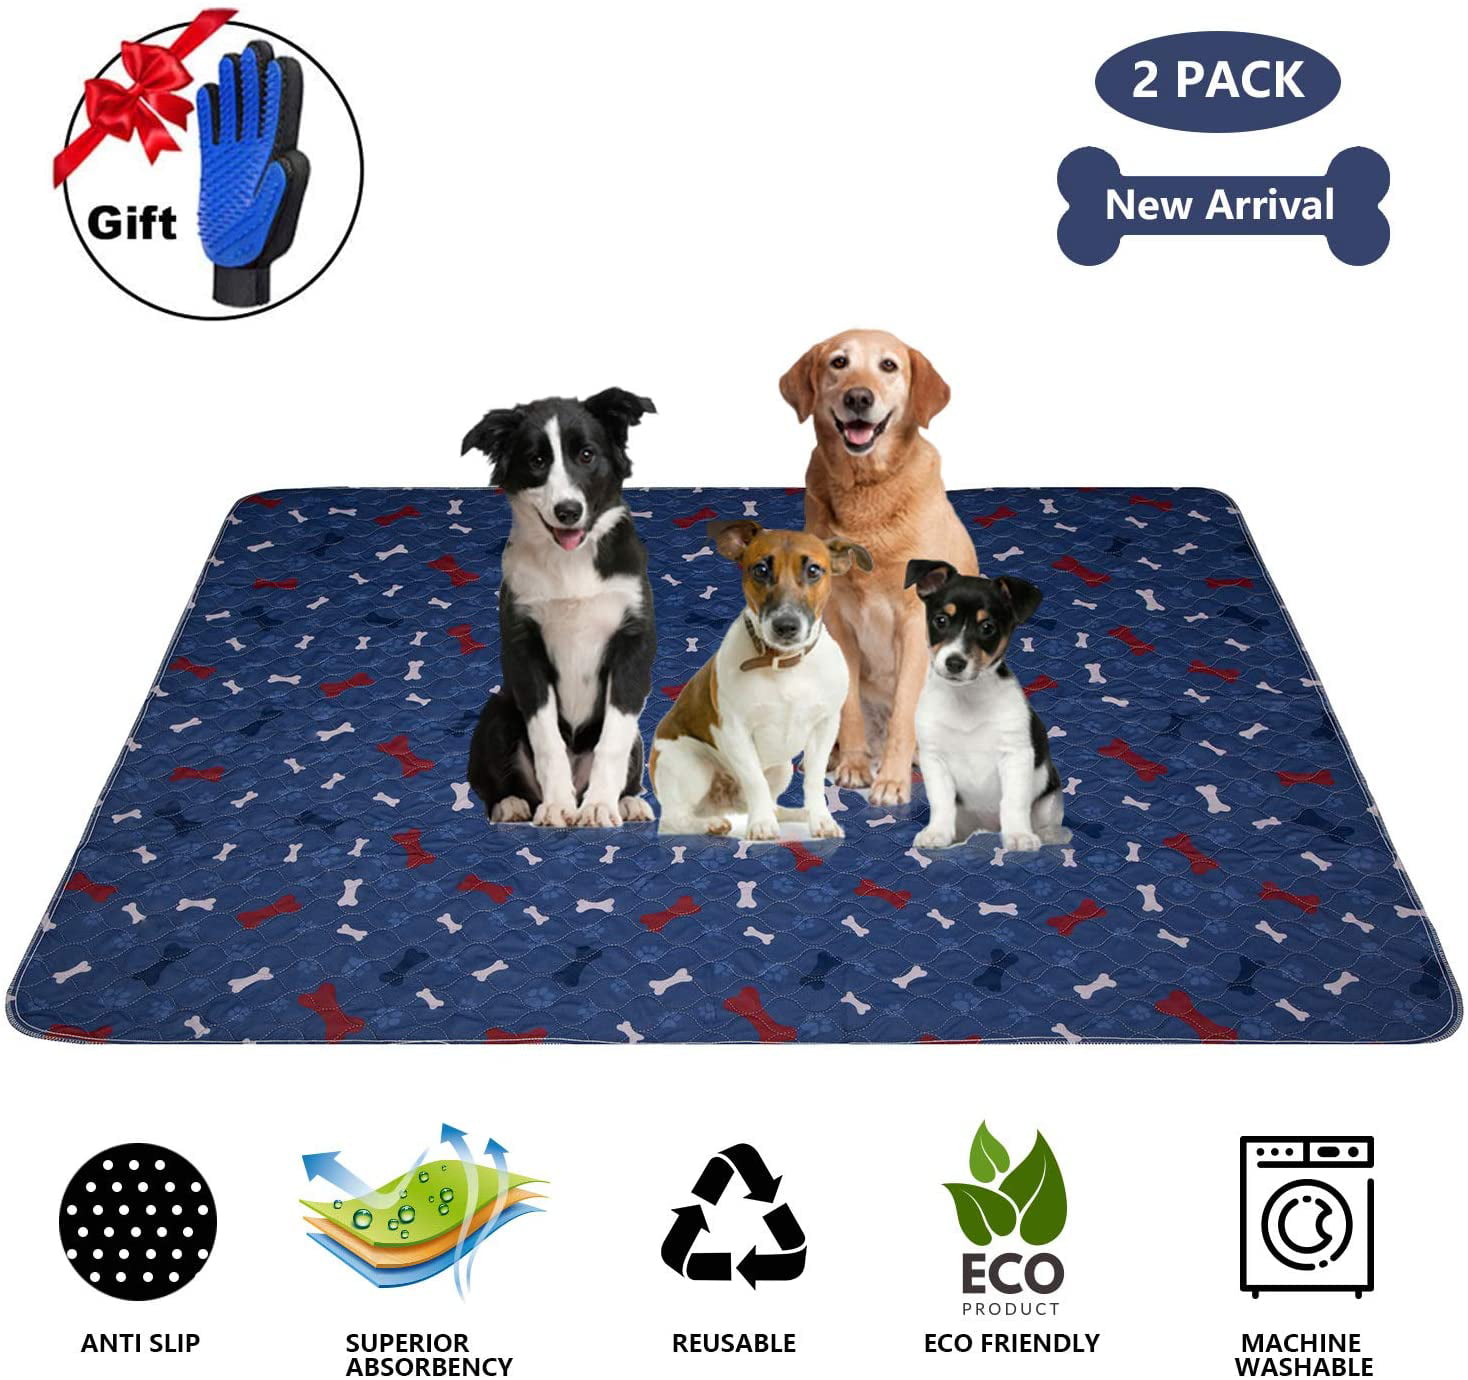 Washable Puppy Pad Stain Resistant Incontinence Solution Waterproof Pee Mat Crate Playpen Liner Large Round Pet Training Supplies Vet Bed Dogs Brown Houseables Whelping Pads 1 Pk